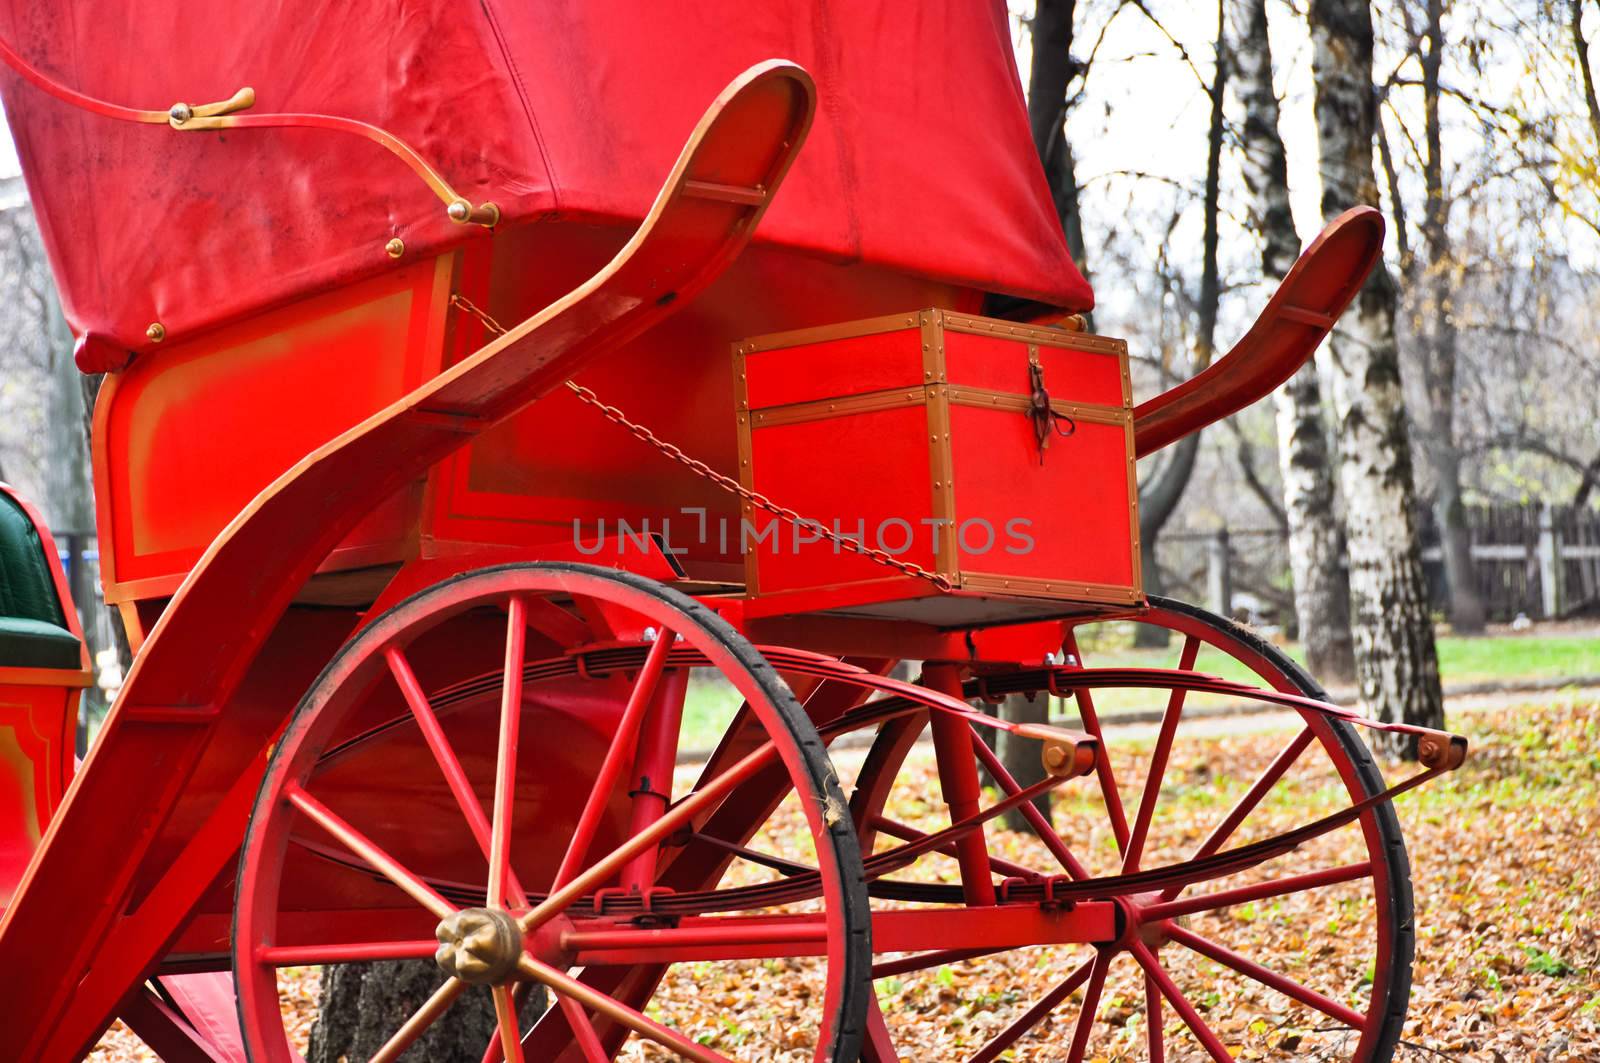 details of the red horse carriages by vlaru